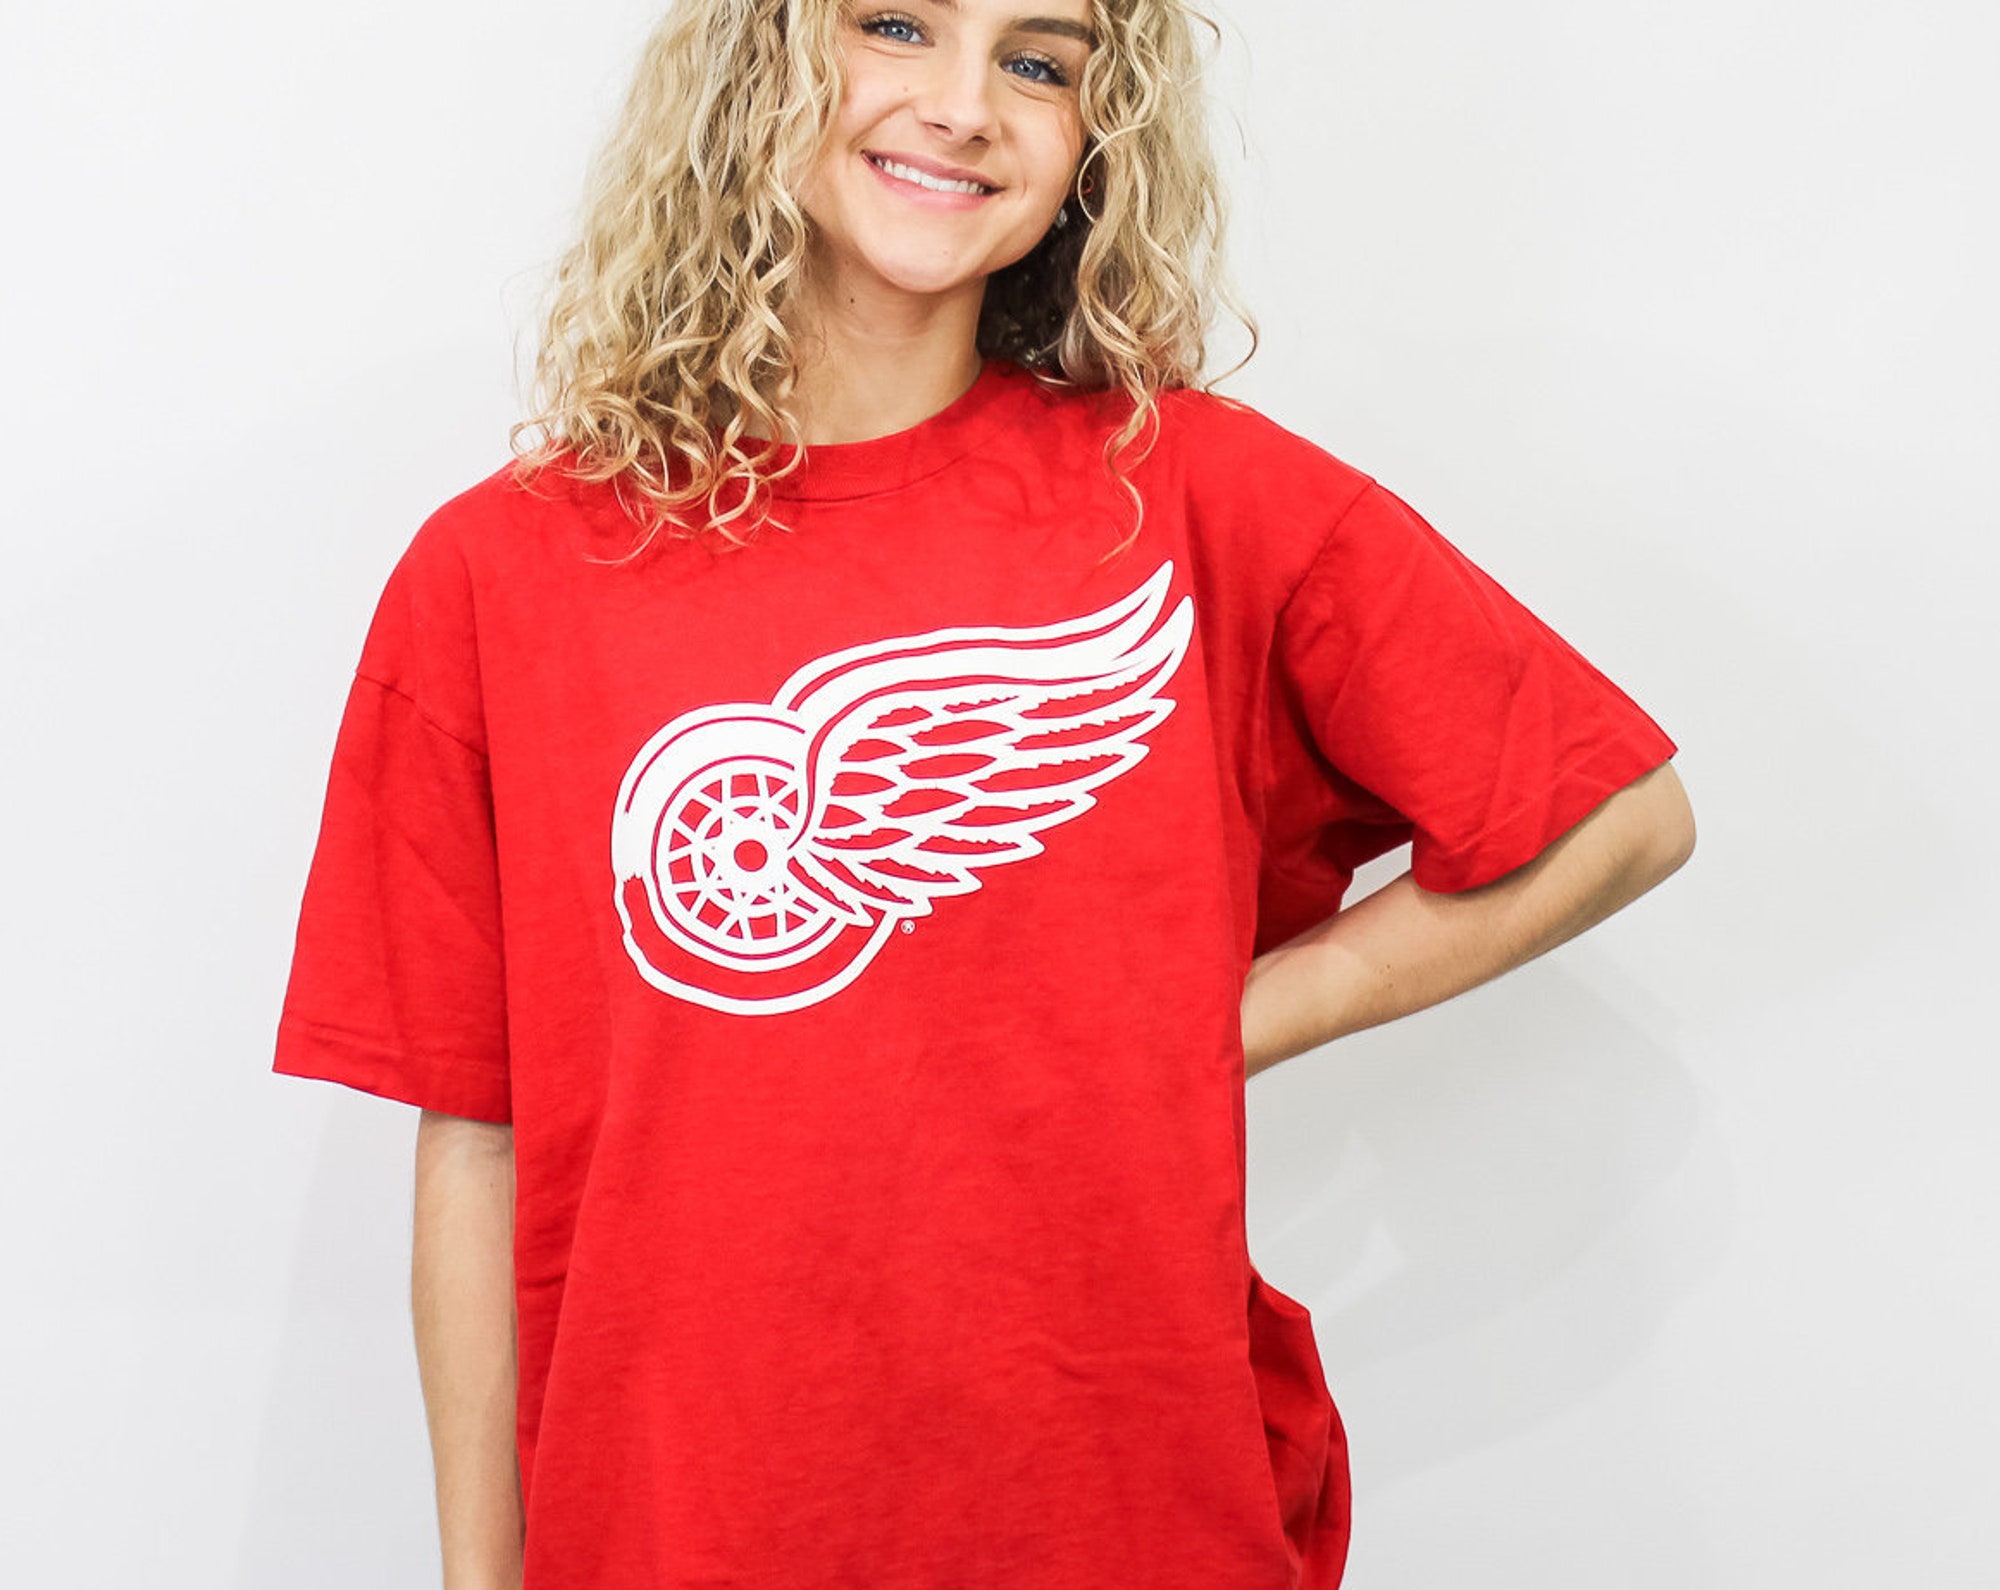 Discover 1992 Vintage Detroit Red Wings Tee